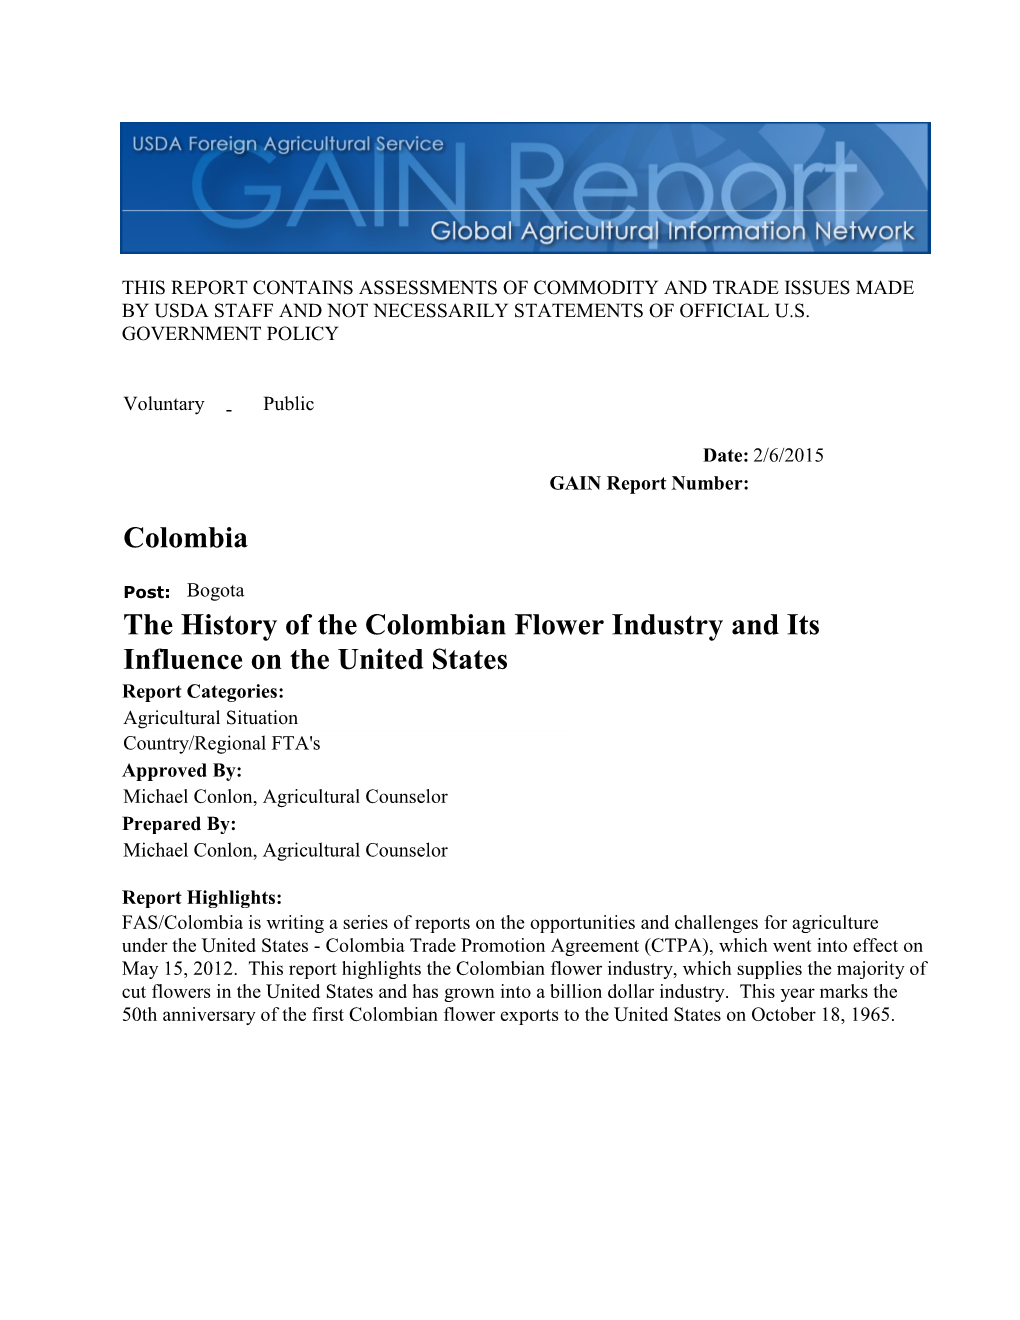 The History of the Colombian Flower Industry and Its Influence on The